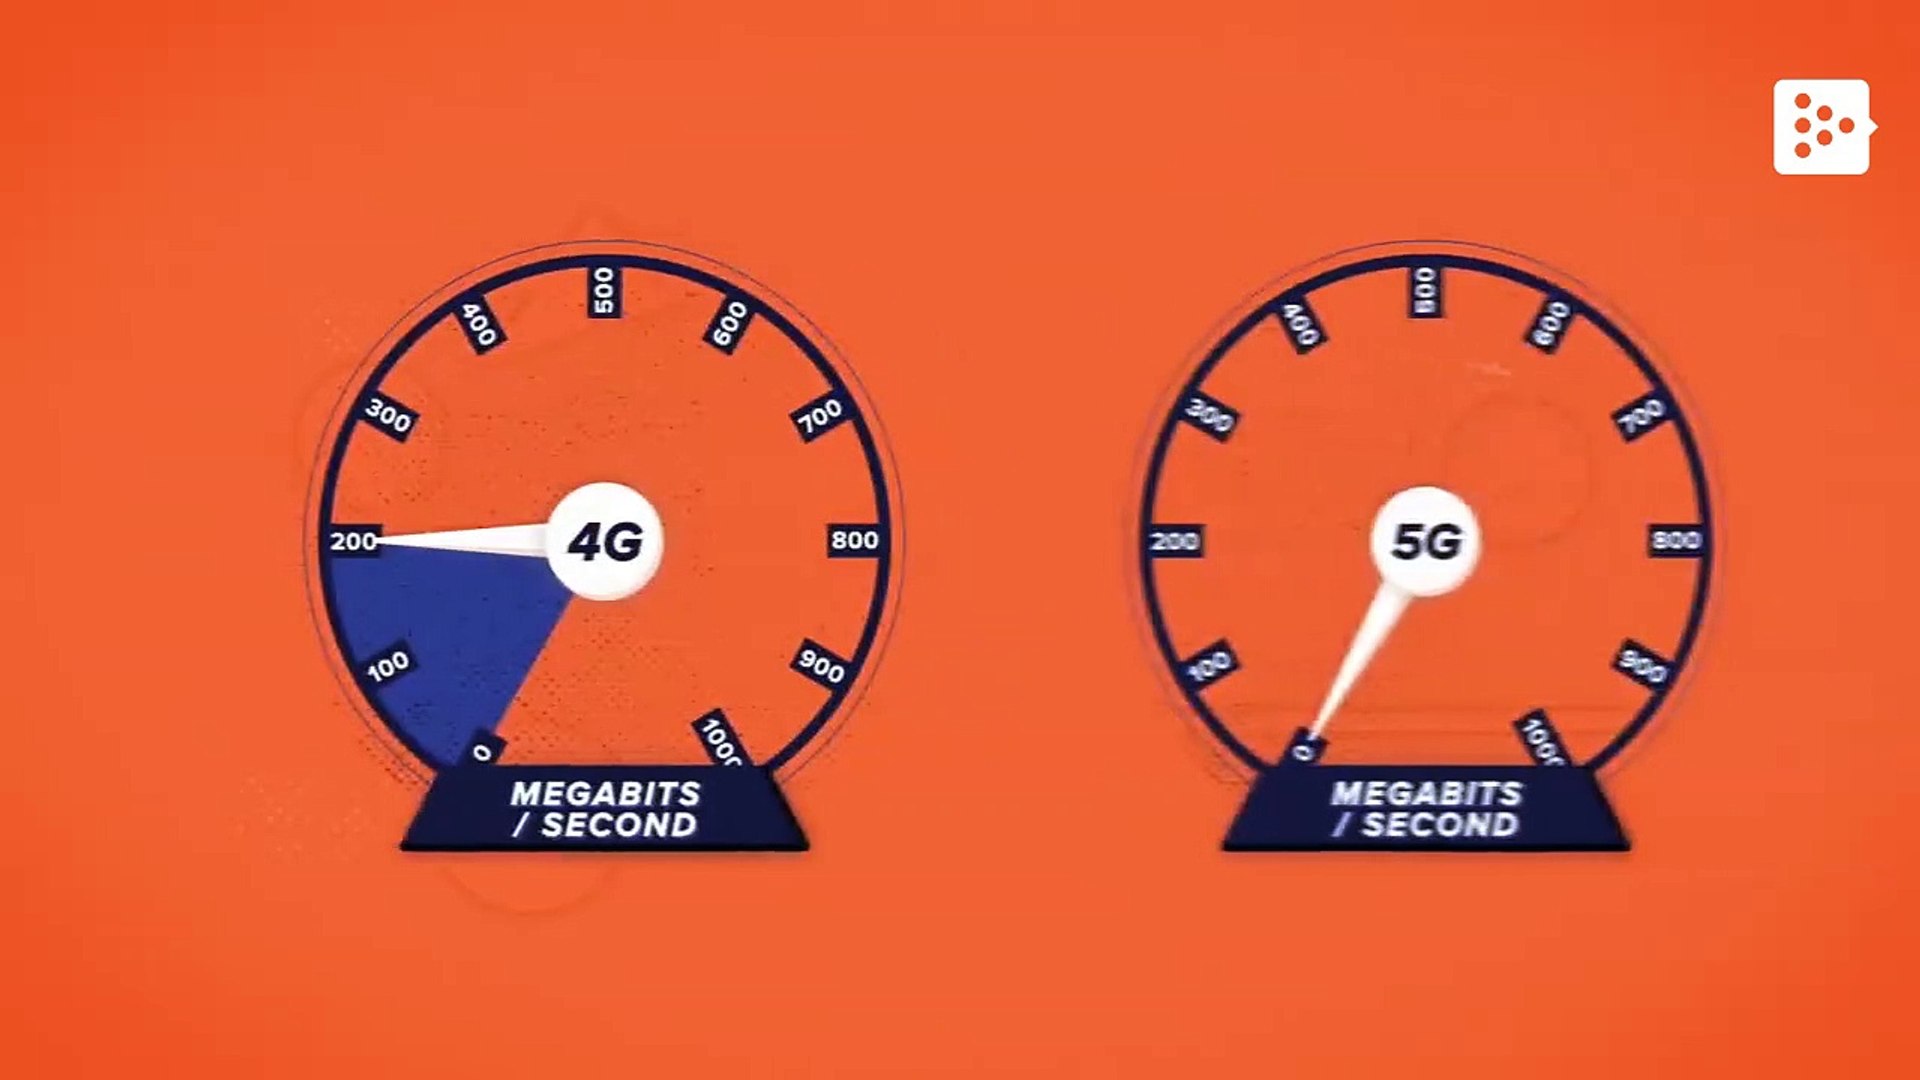 Ampliffy Tv In English What Is 5g And What Differences Does It Have With 4g 